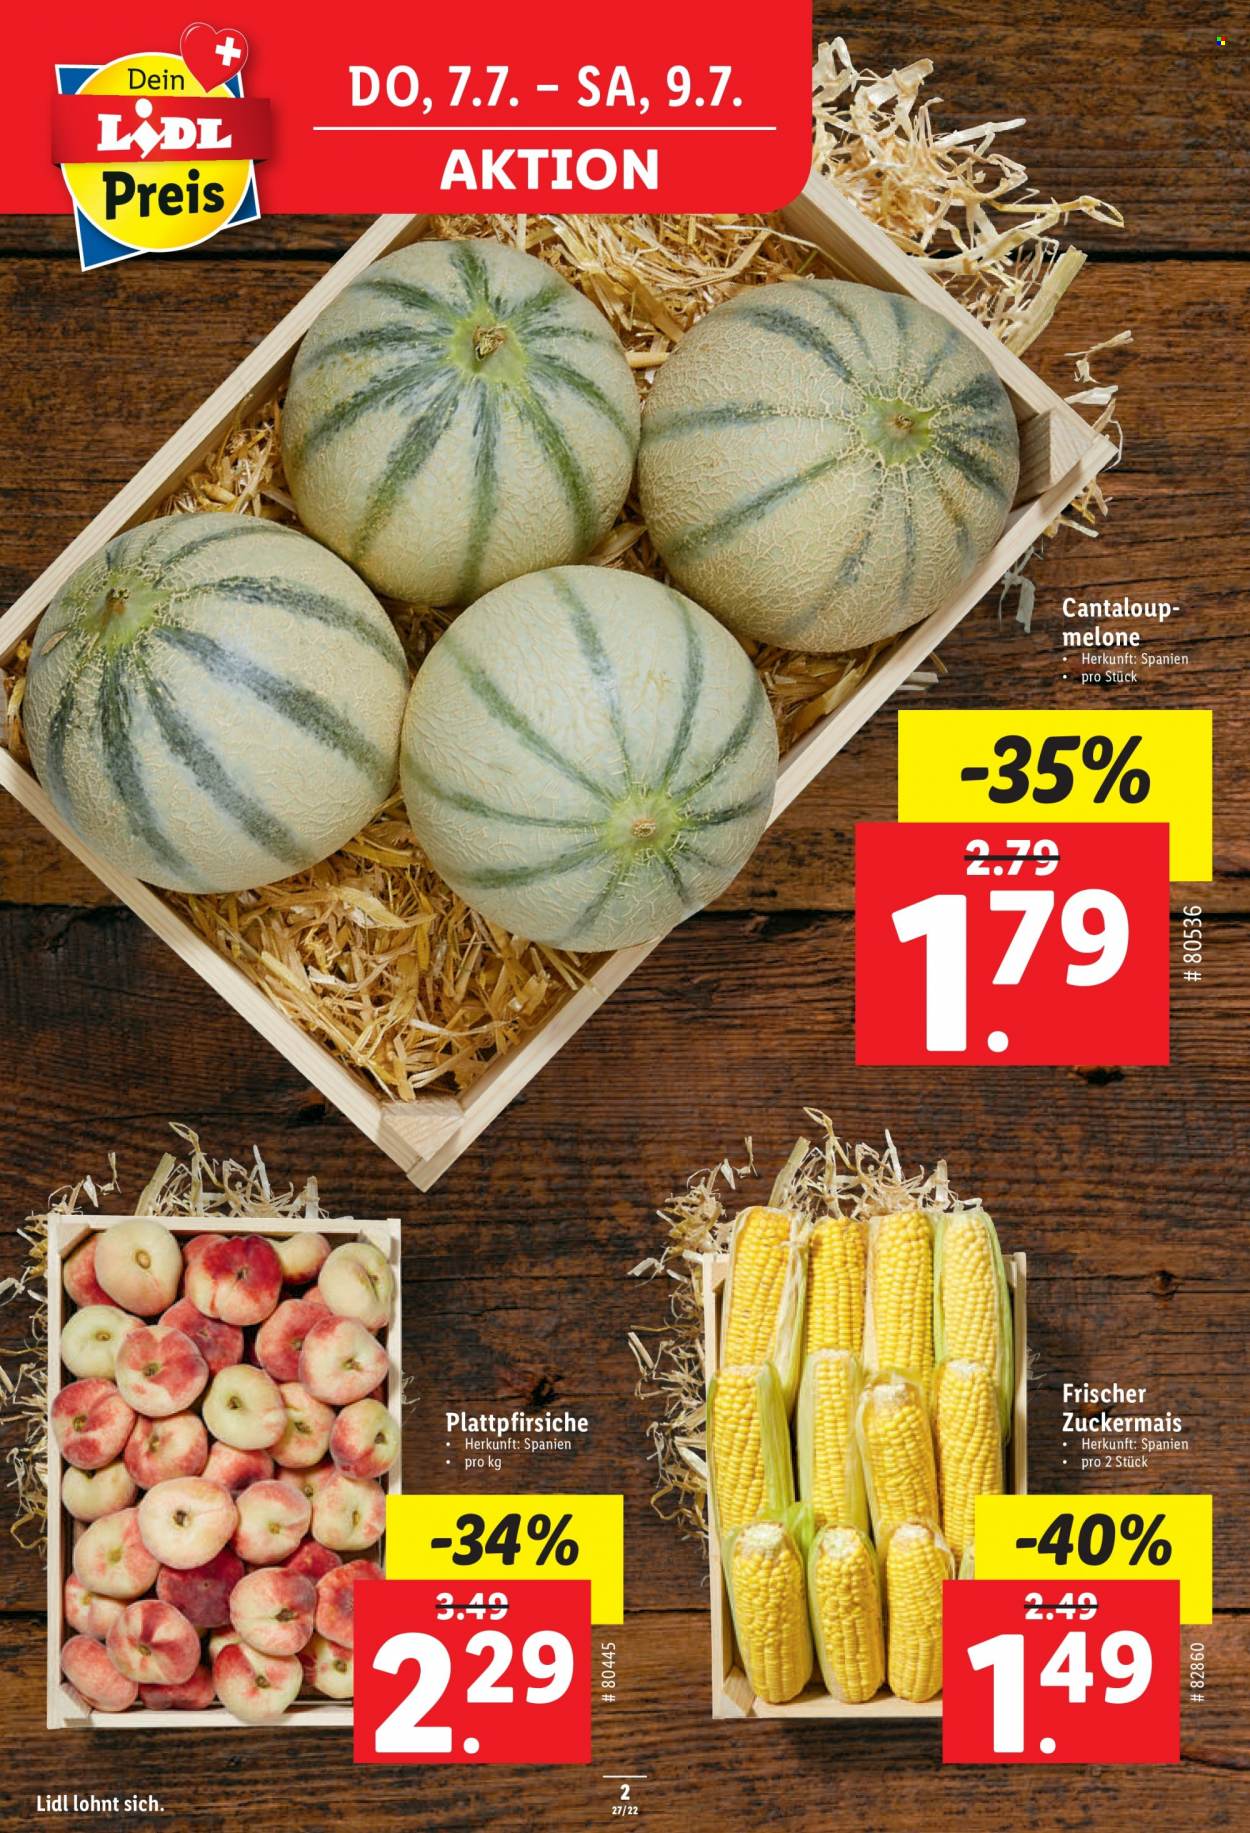 Catalogue Lidl - 7.7.2022 - 13.7.2022. Page 2.